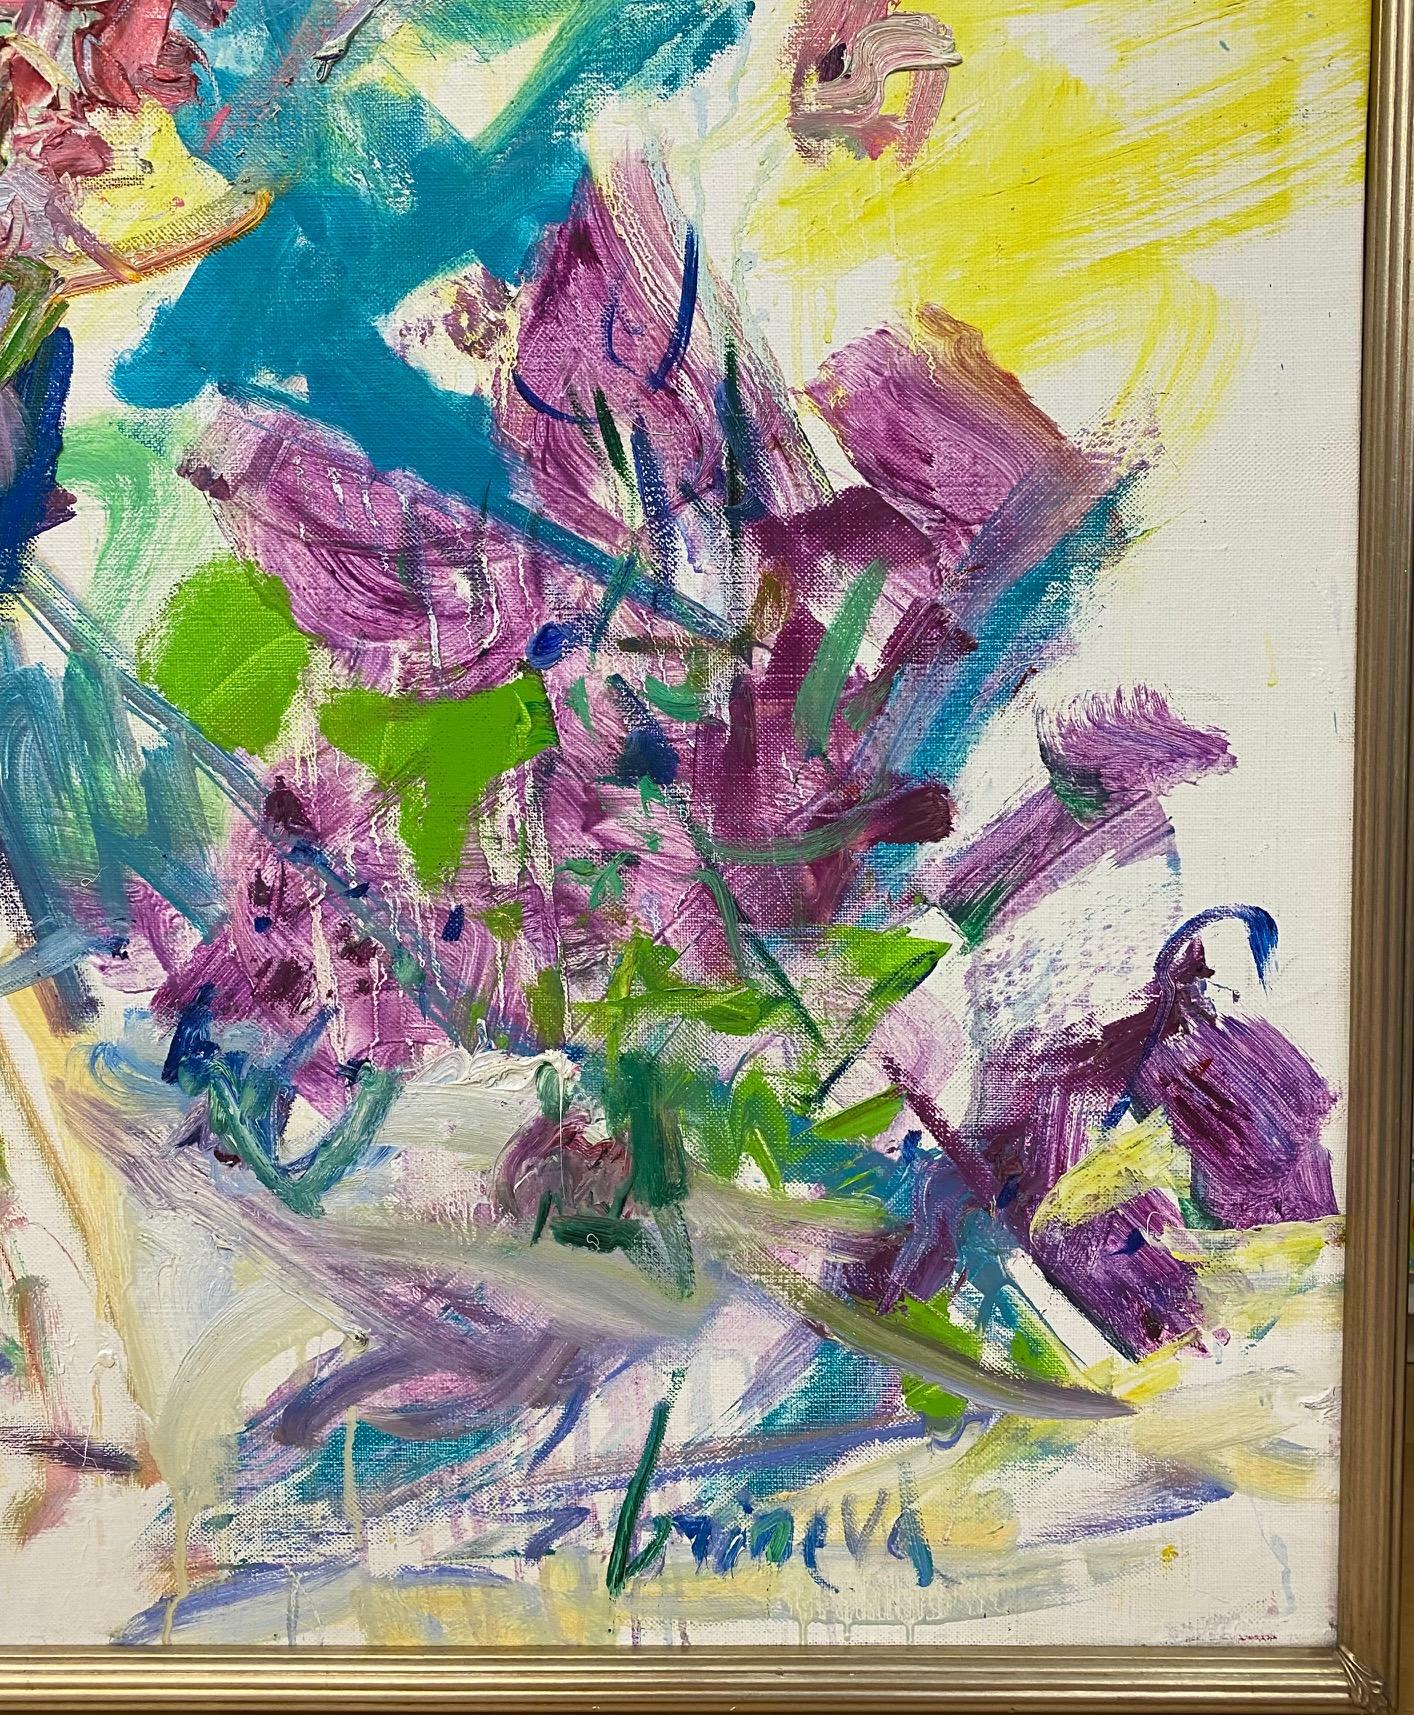 Island Winds of Italy, paysage floral expressionniste abstrait, 48x36 en vente 2